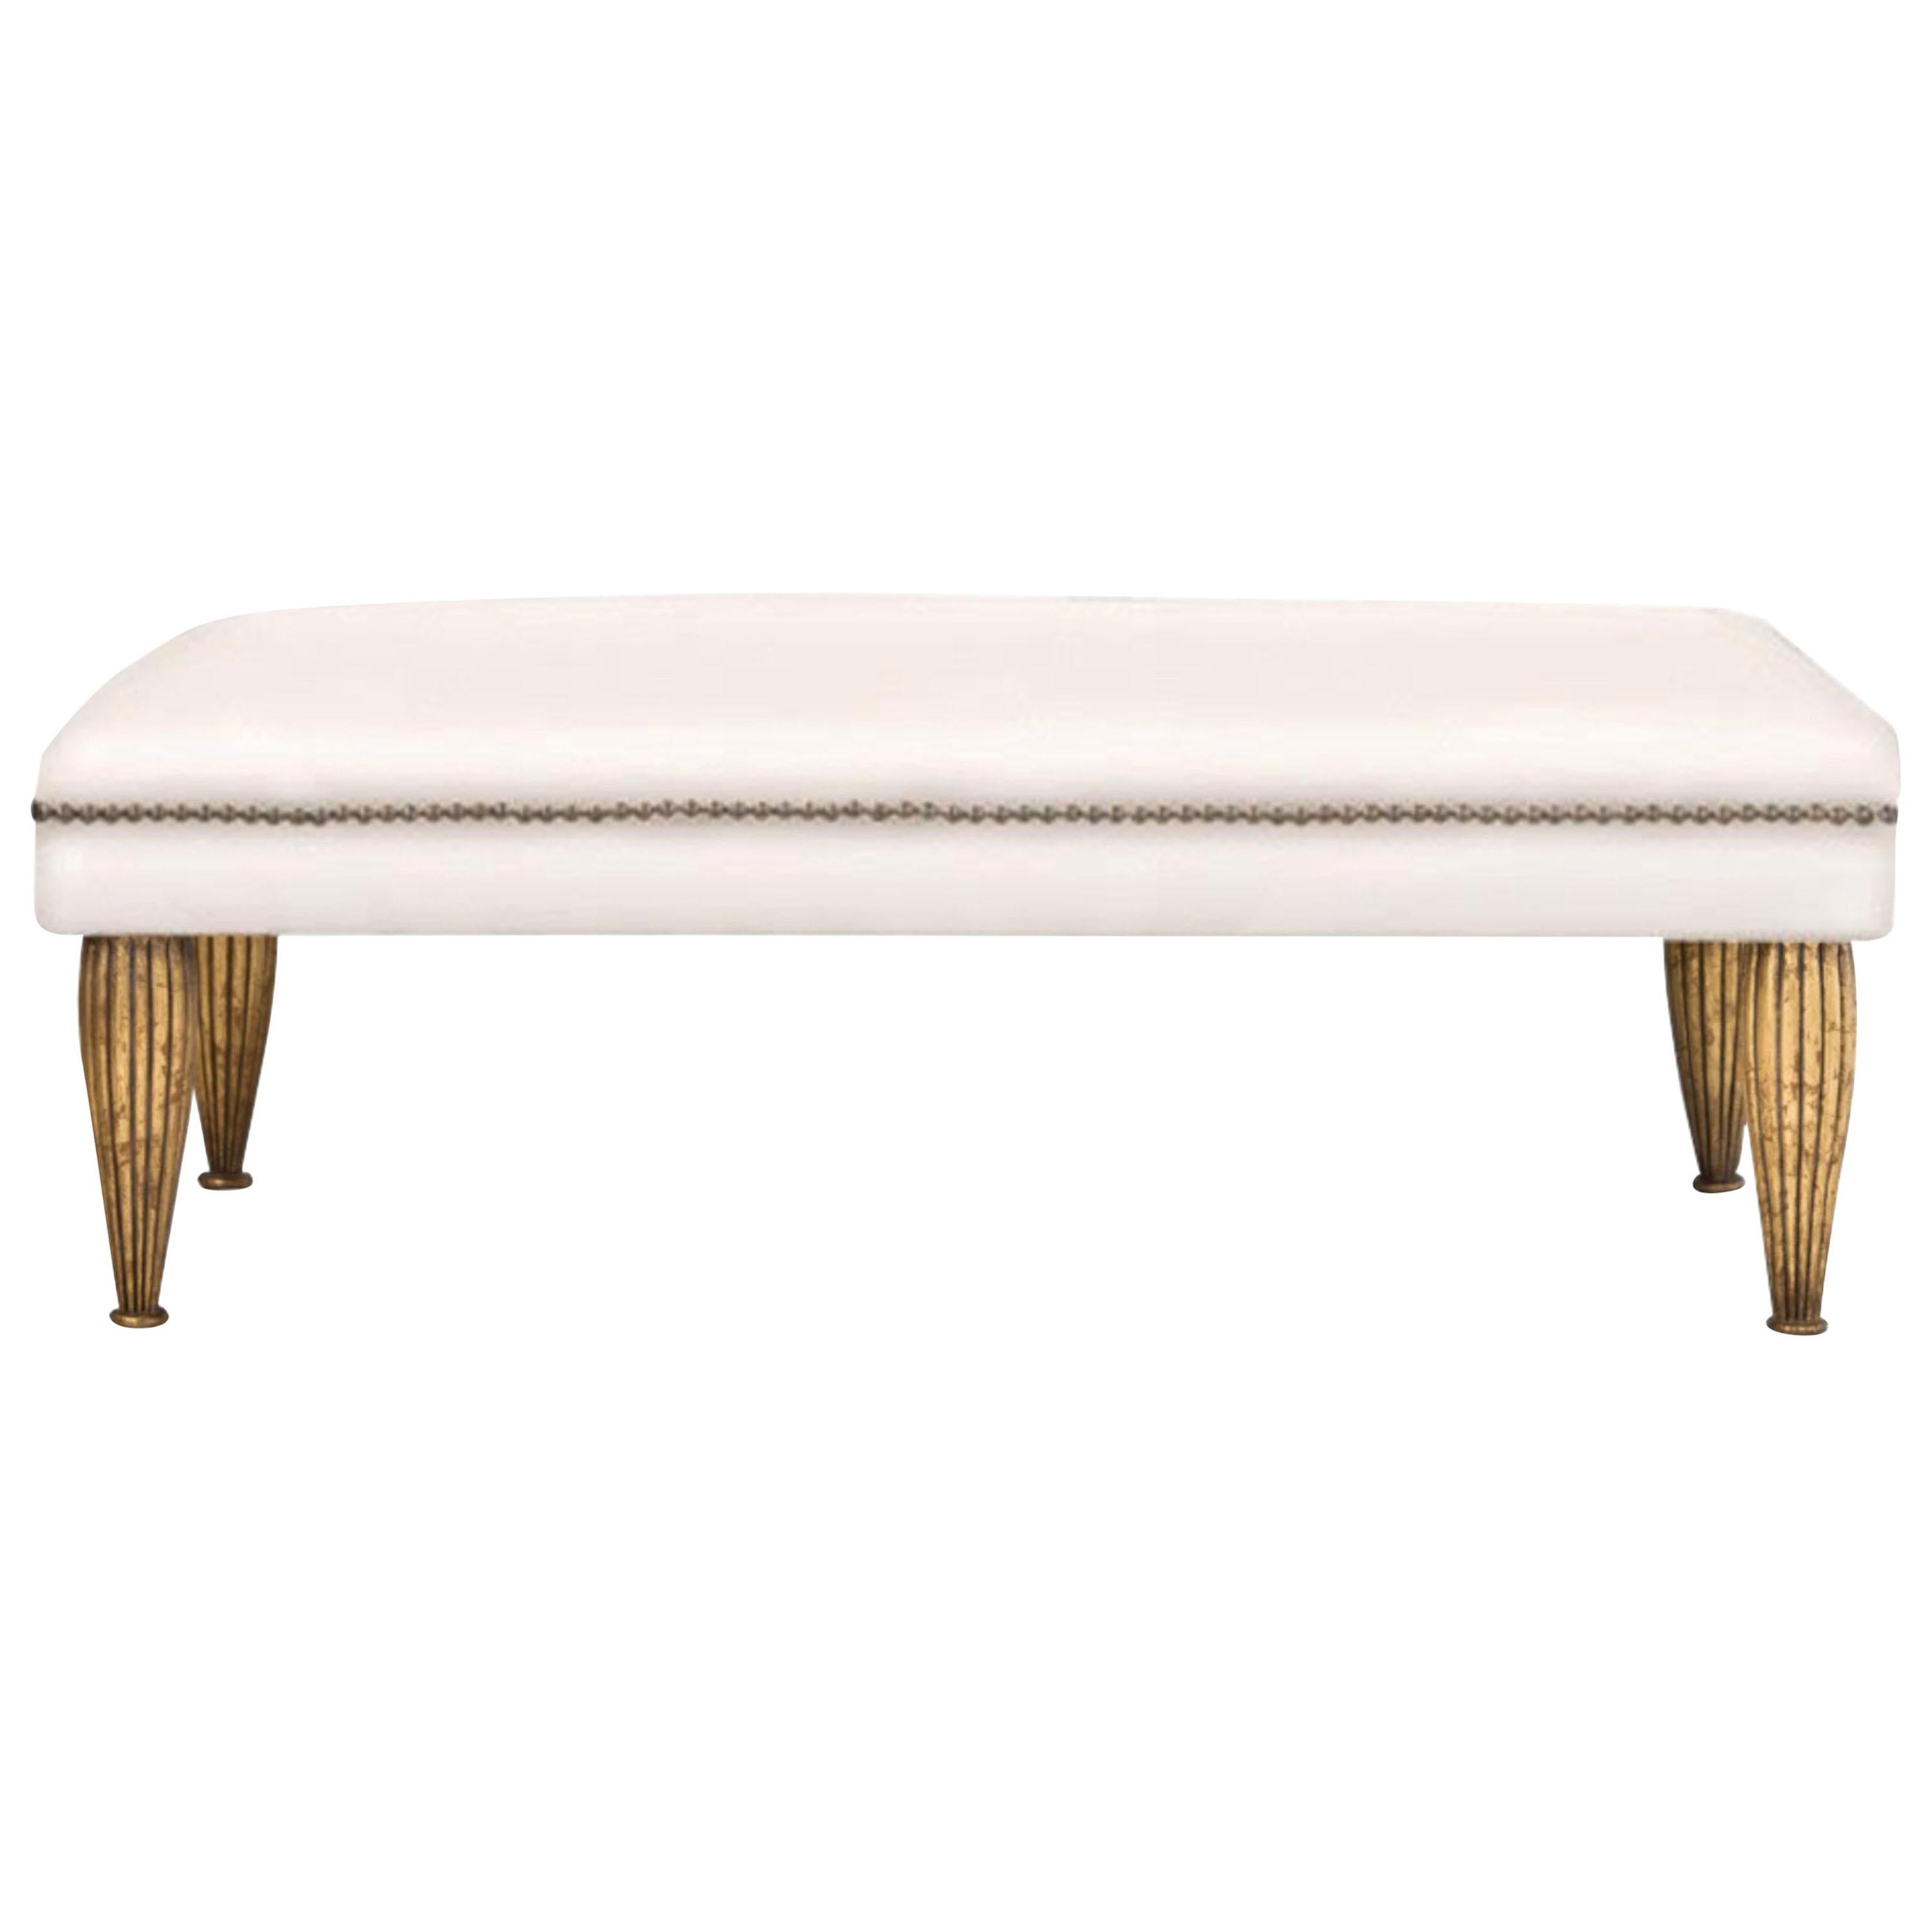 Contemporary Bench with Gilded Legs, White Cowhide